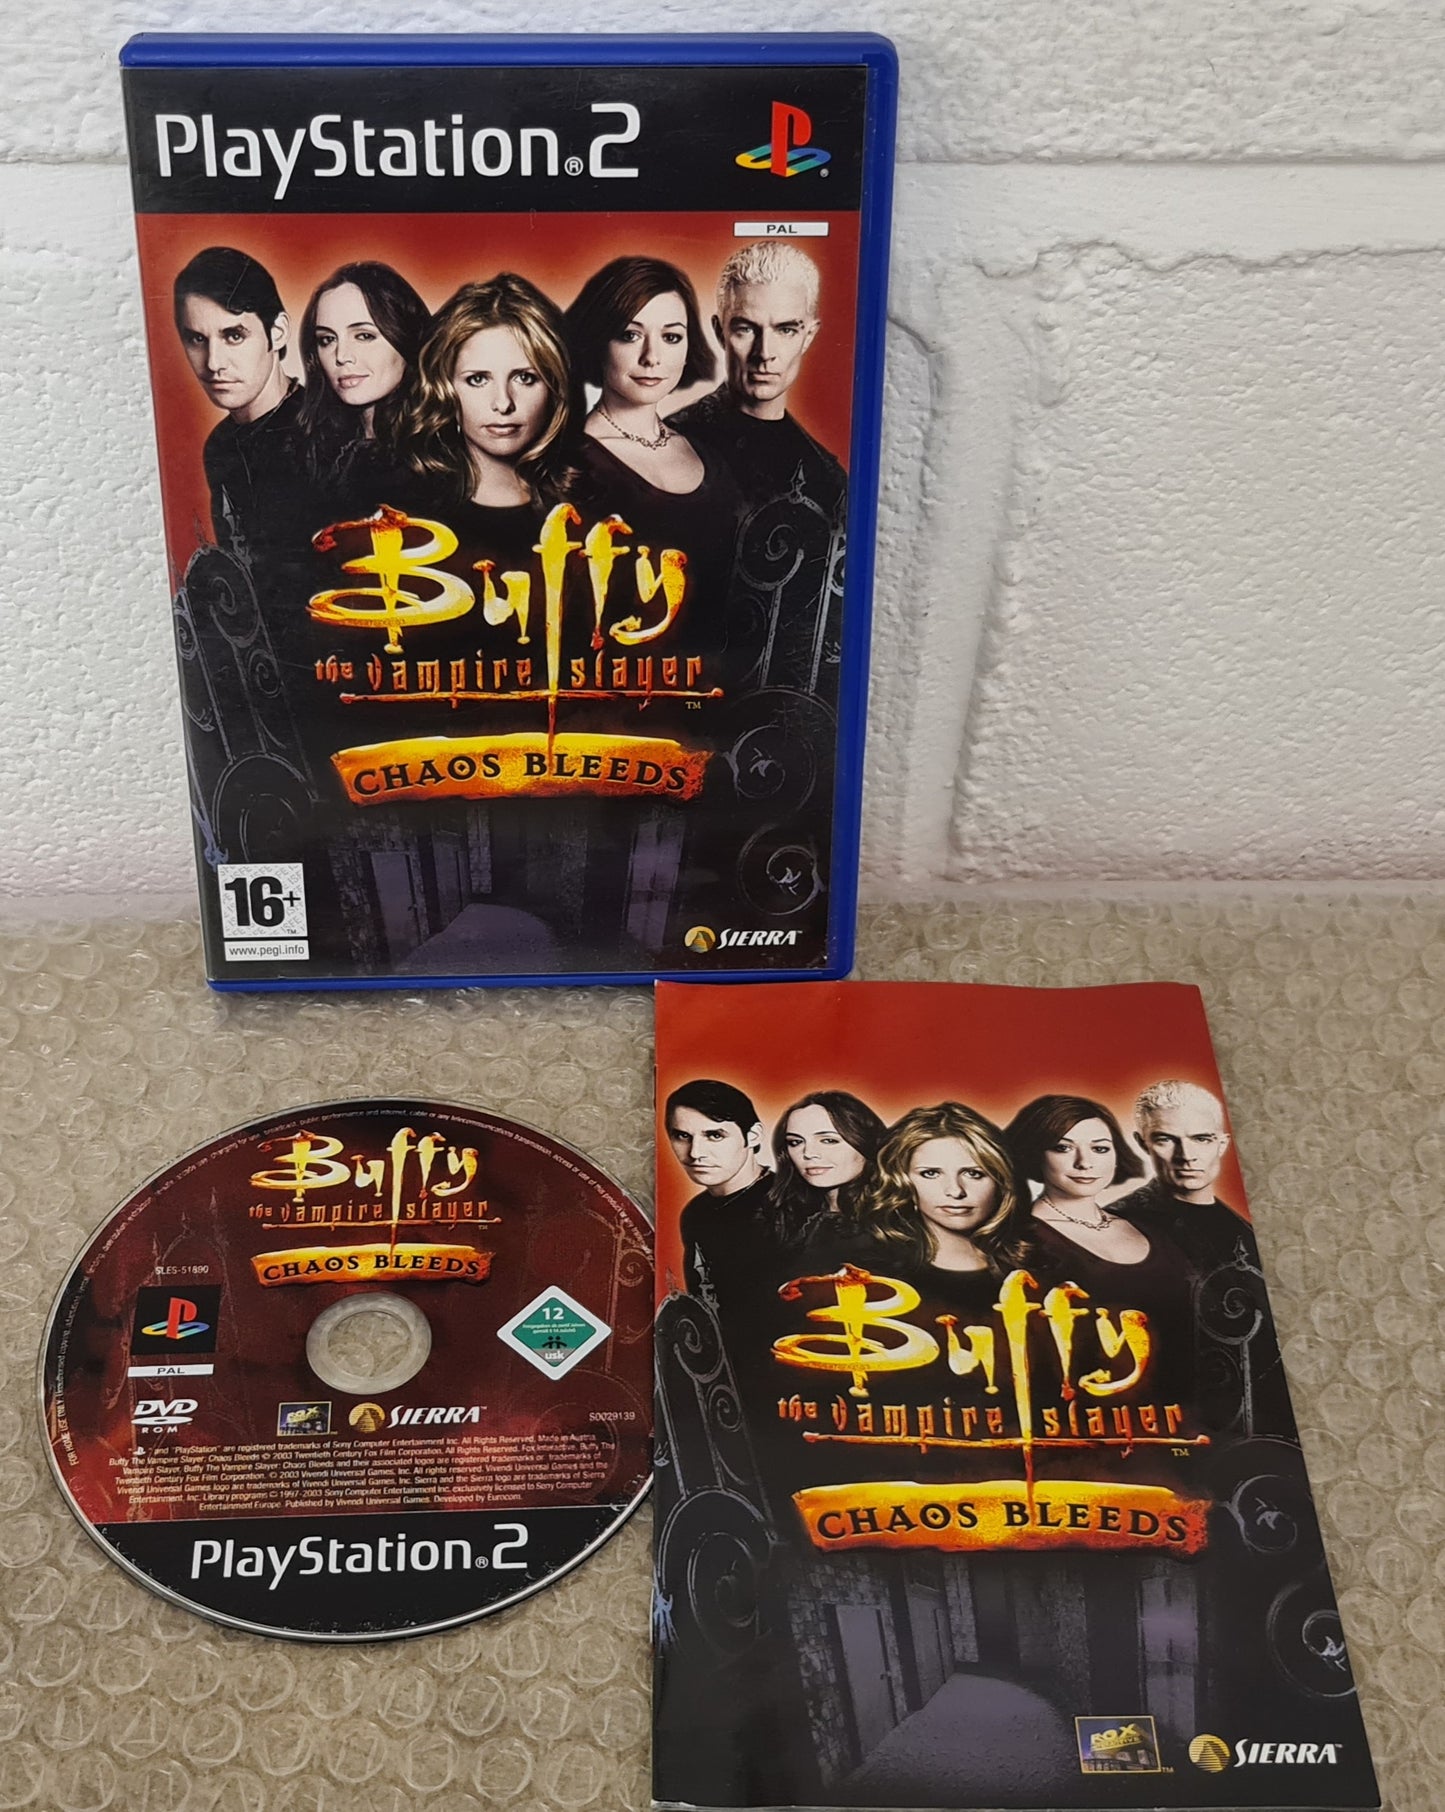 Buffy the Vampire Slayer Chaos Bleeds Sony Playstation 2 (PS2) Game